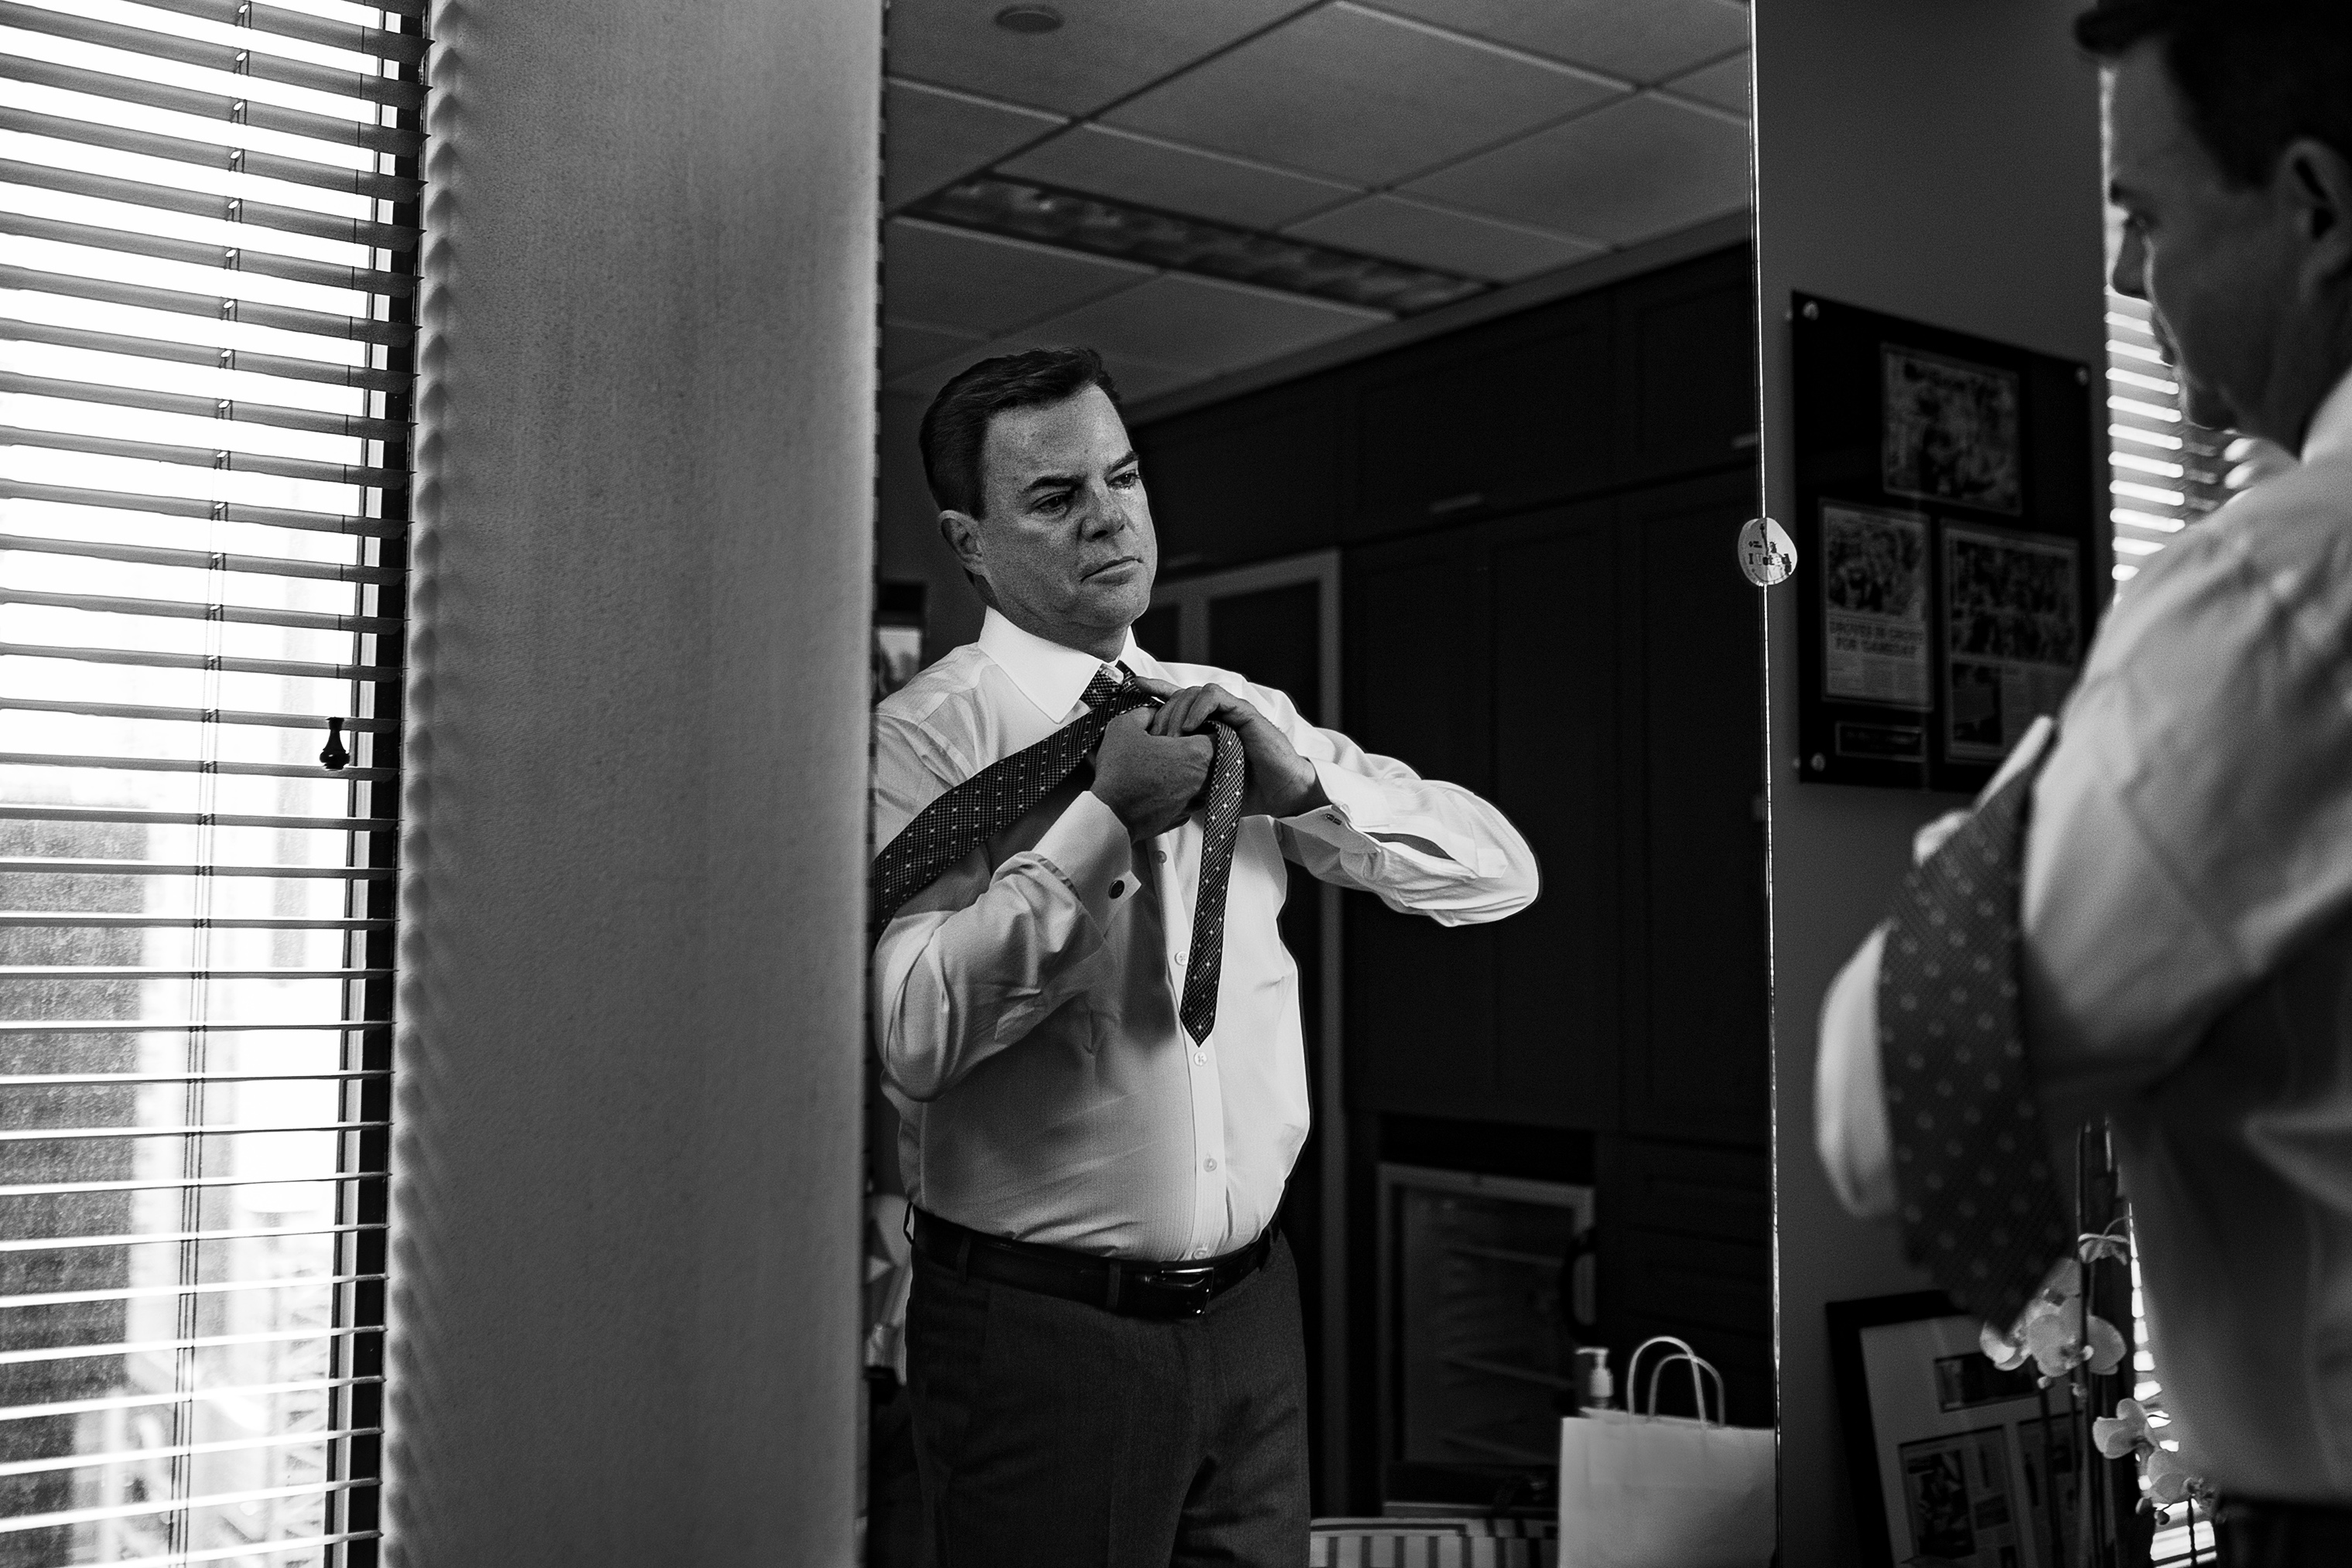 Shepard Smith at Fox News' offices in New York, Thursday, March 1, 2018. (Andres Kudacki for TIME)